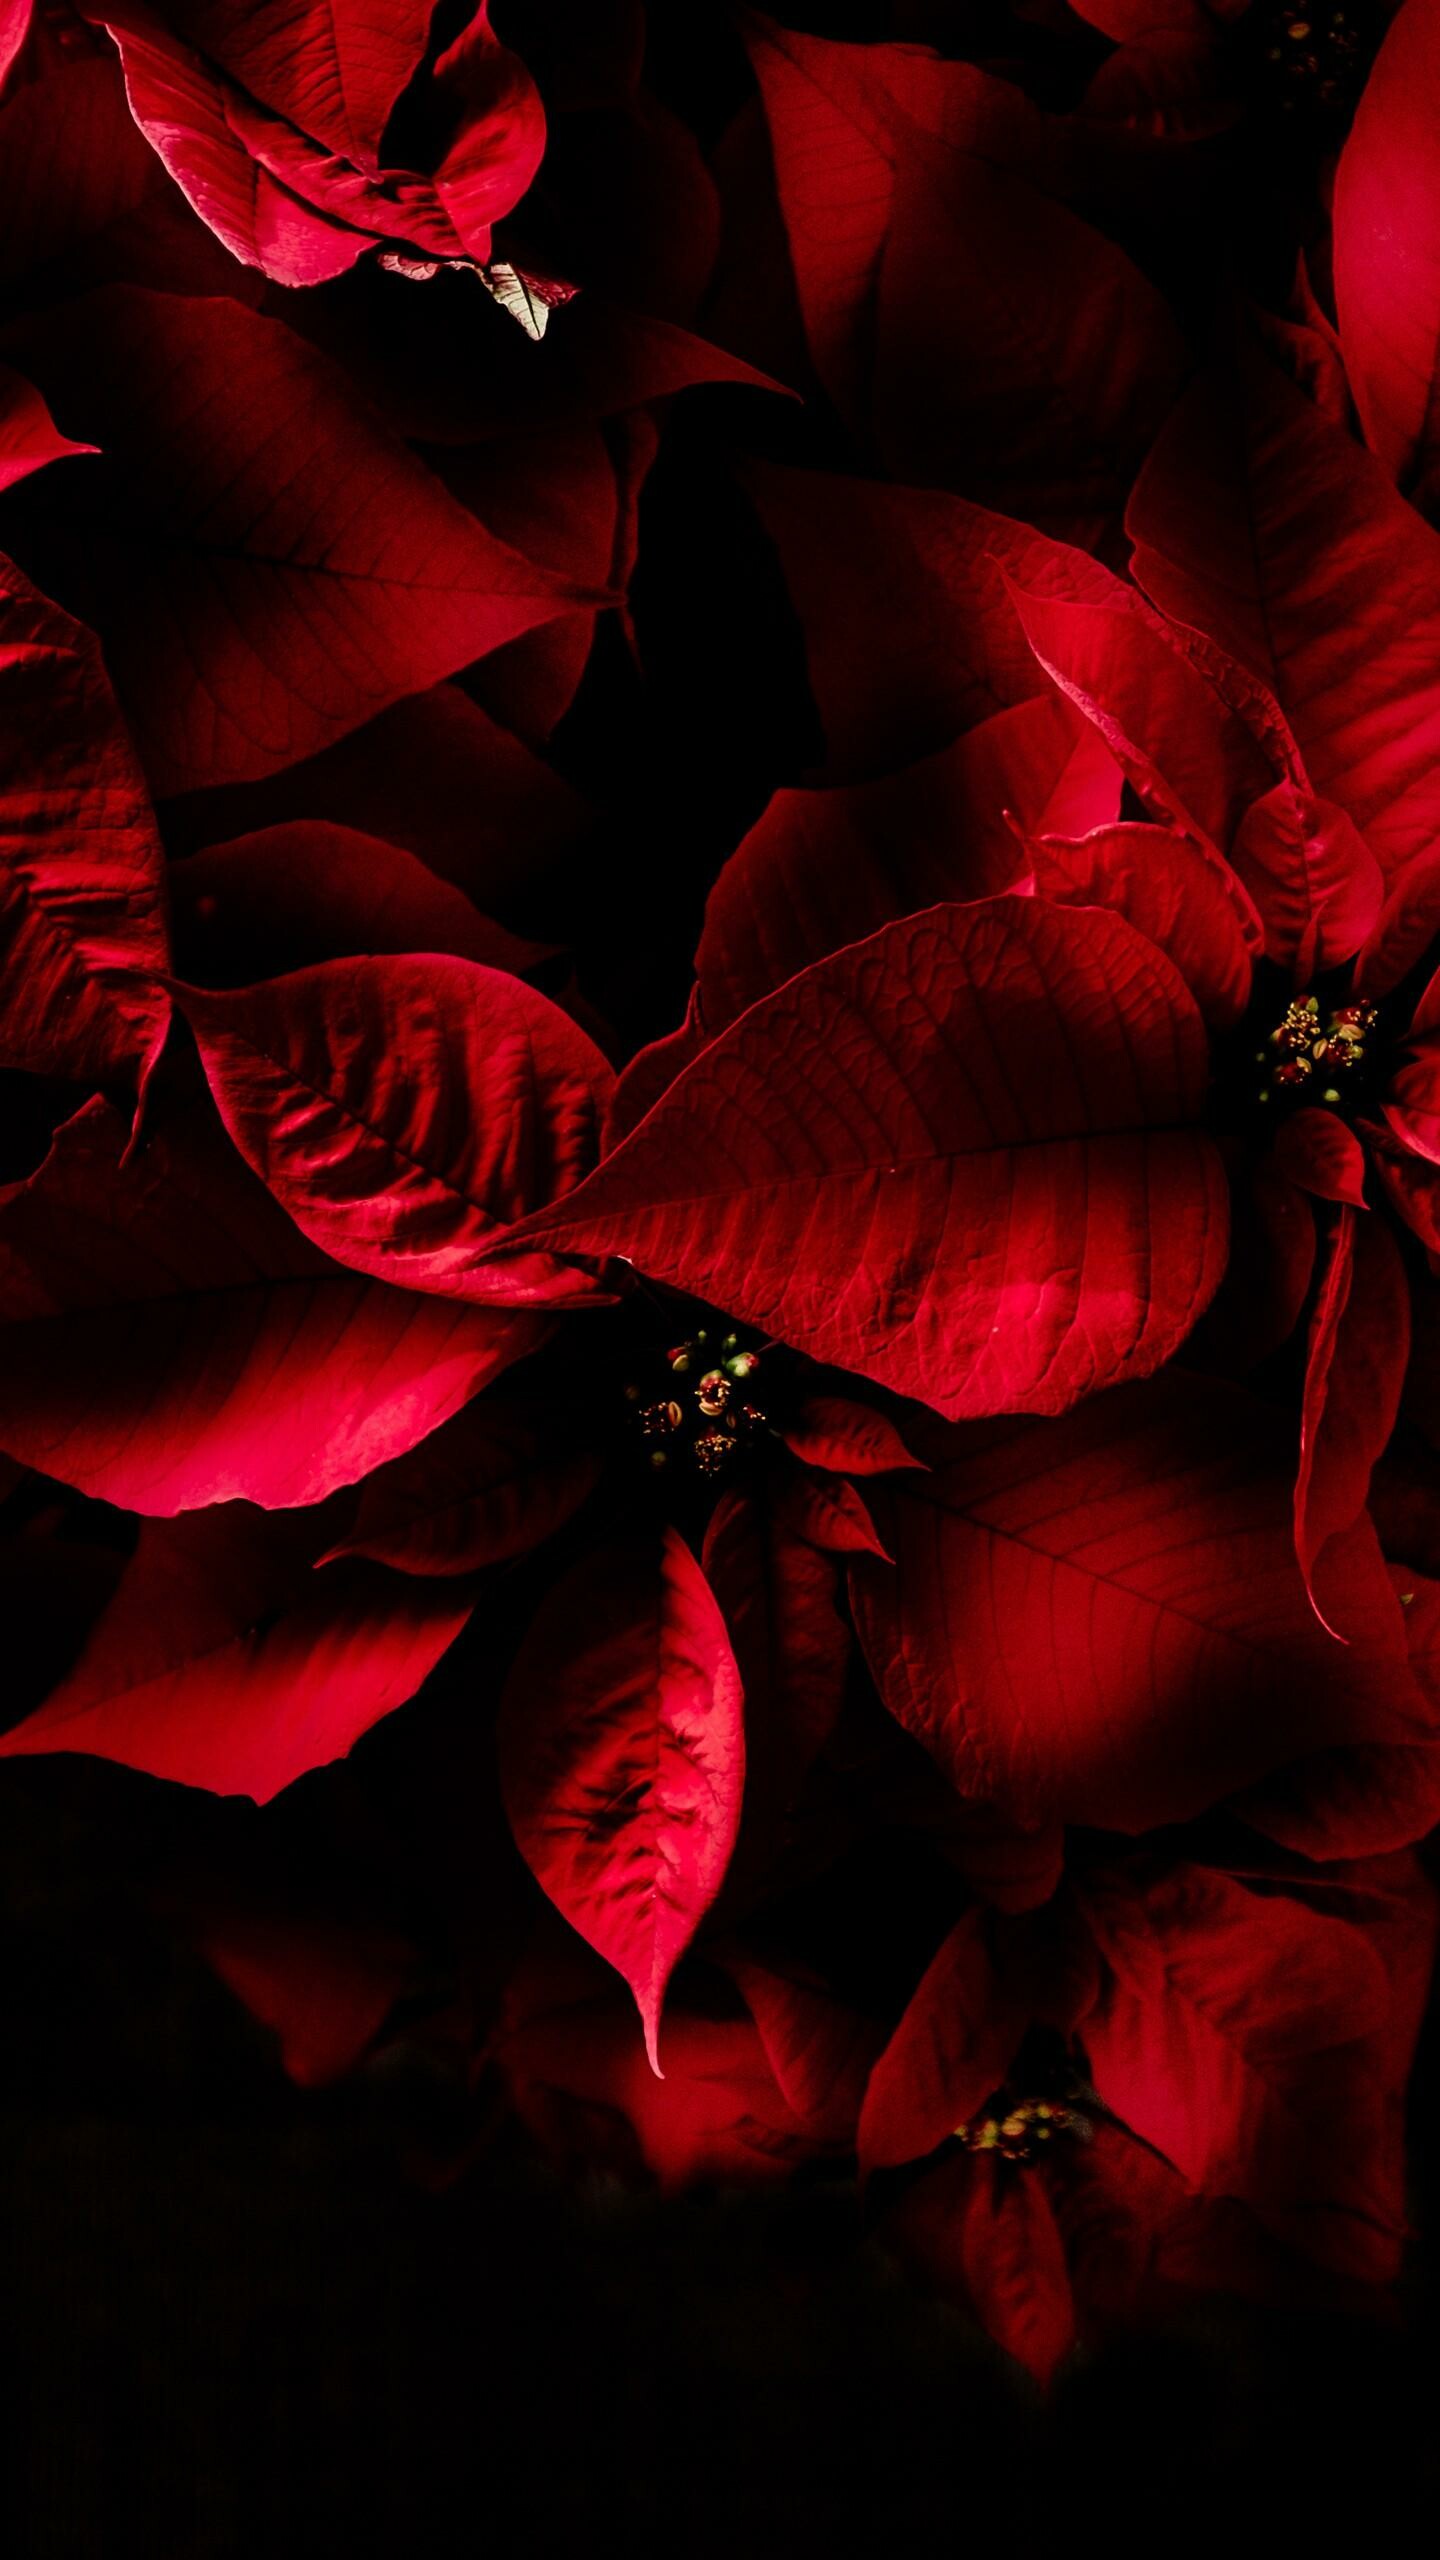 Note 20 Ultra wallpaper, Sun-kissed Poinsettia, Striking red, Mobile background, 1440x2560 HD Phone